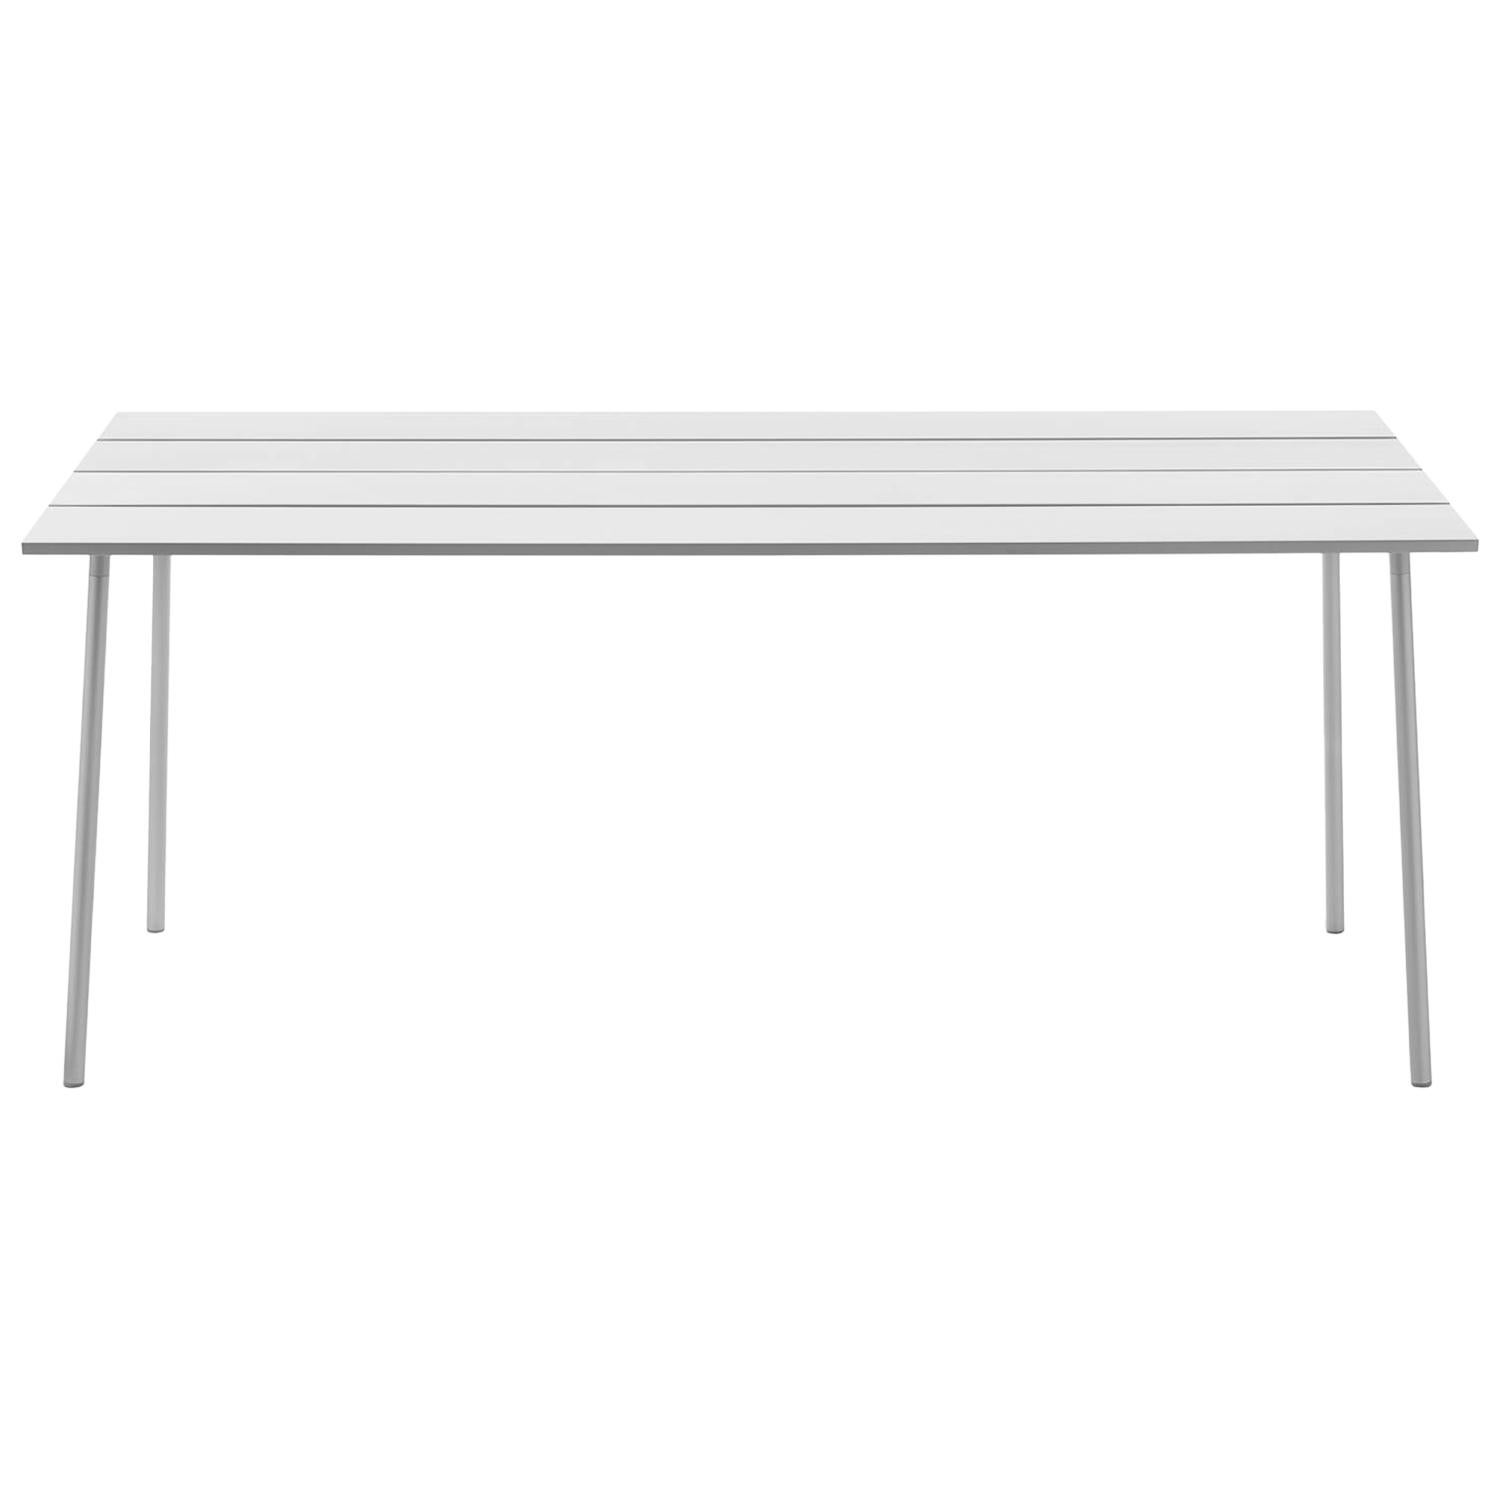 Emeco Run XL High Table in Clear Anodized Aluminum by Sam Hecht + Kim Colin For Sale